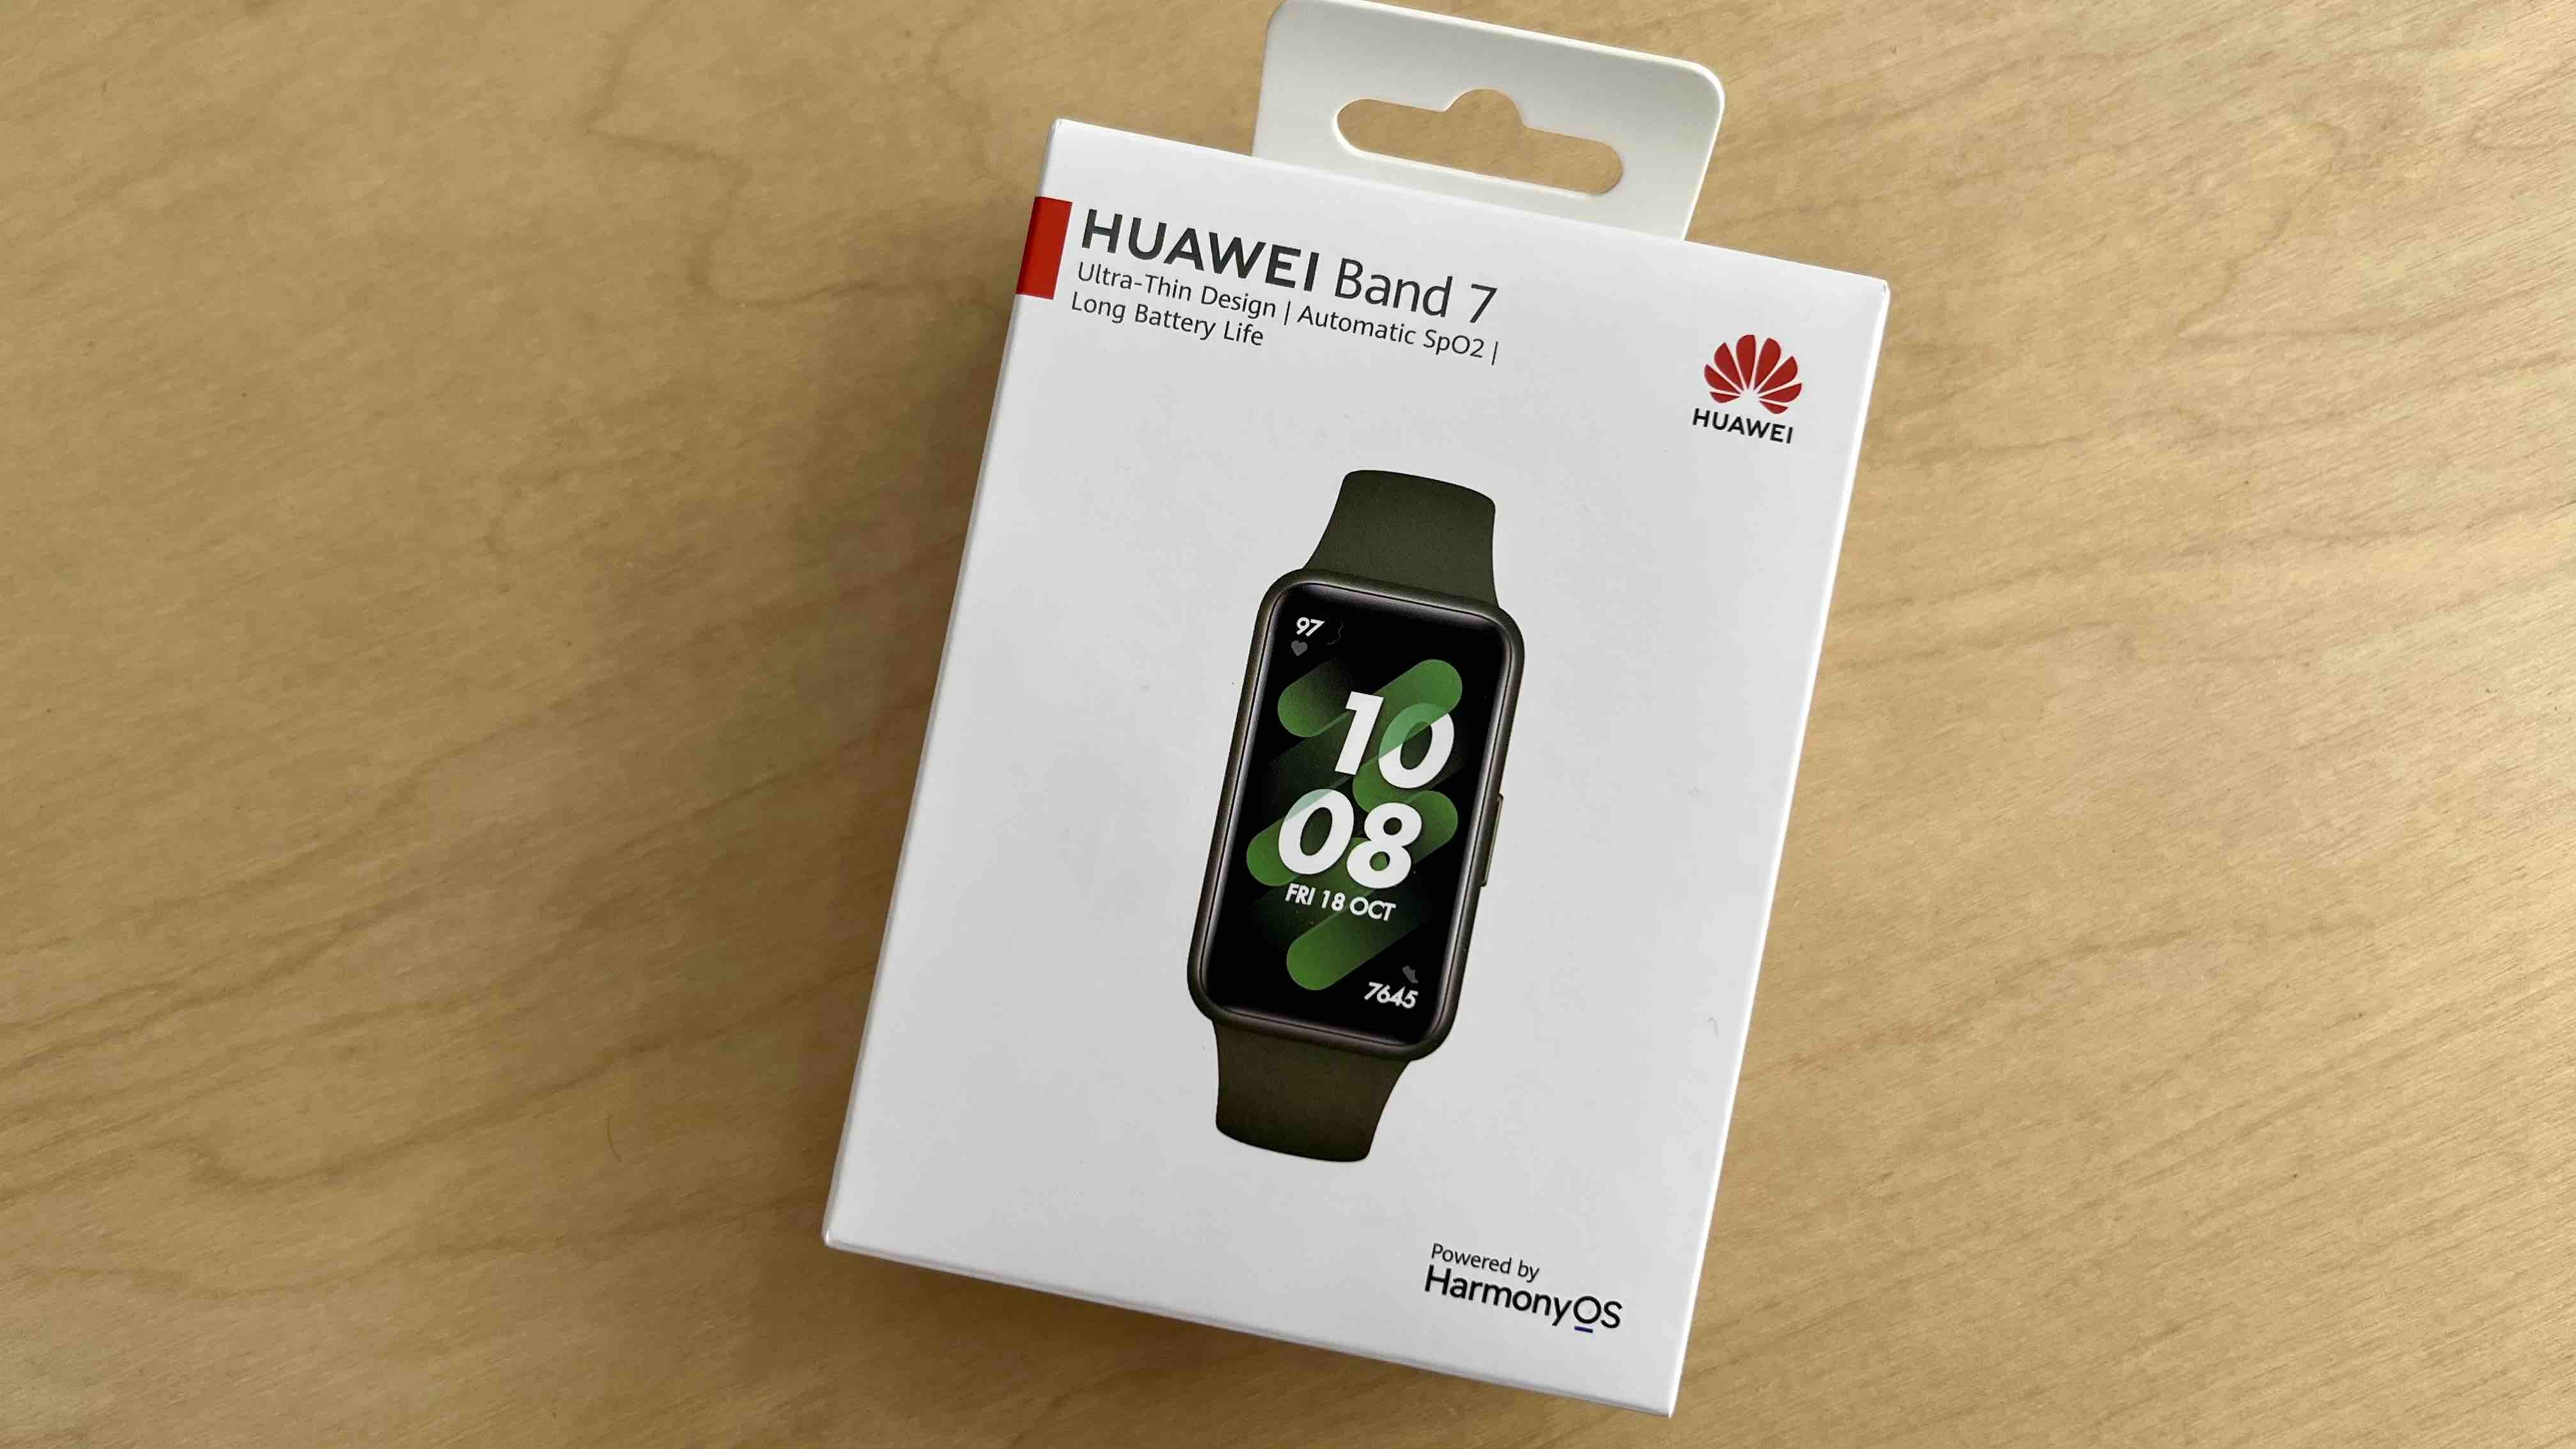 Huawei Band 7-One of the Best Fitness Trackers Now, Tekkaus®, Malaysia  Lifestyle Blogger